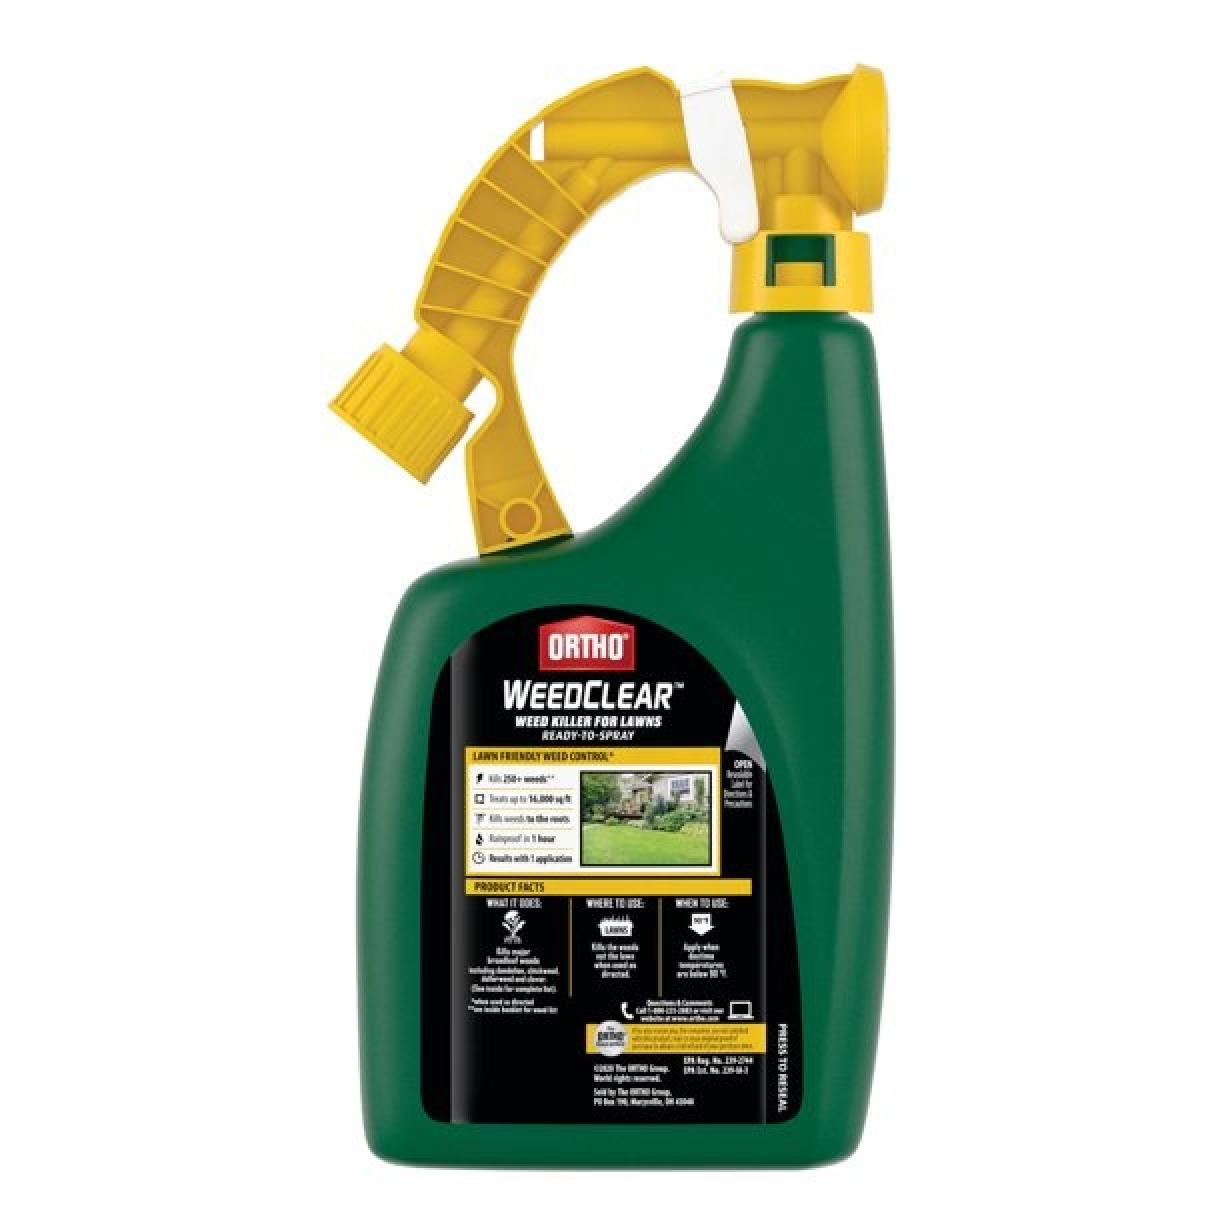 Ortho WeedClear Weed Killer For Lawns